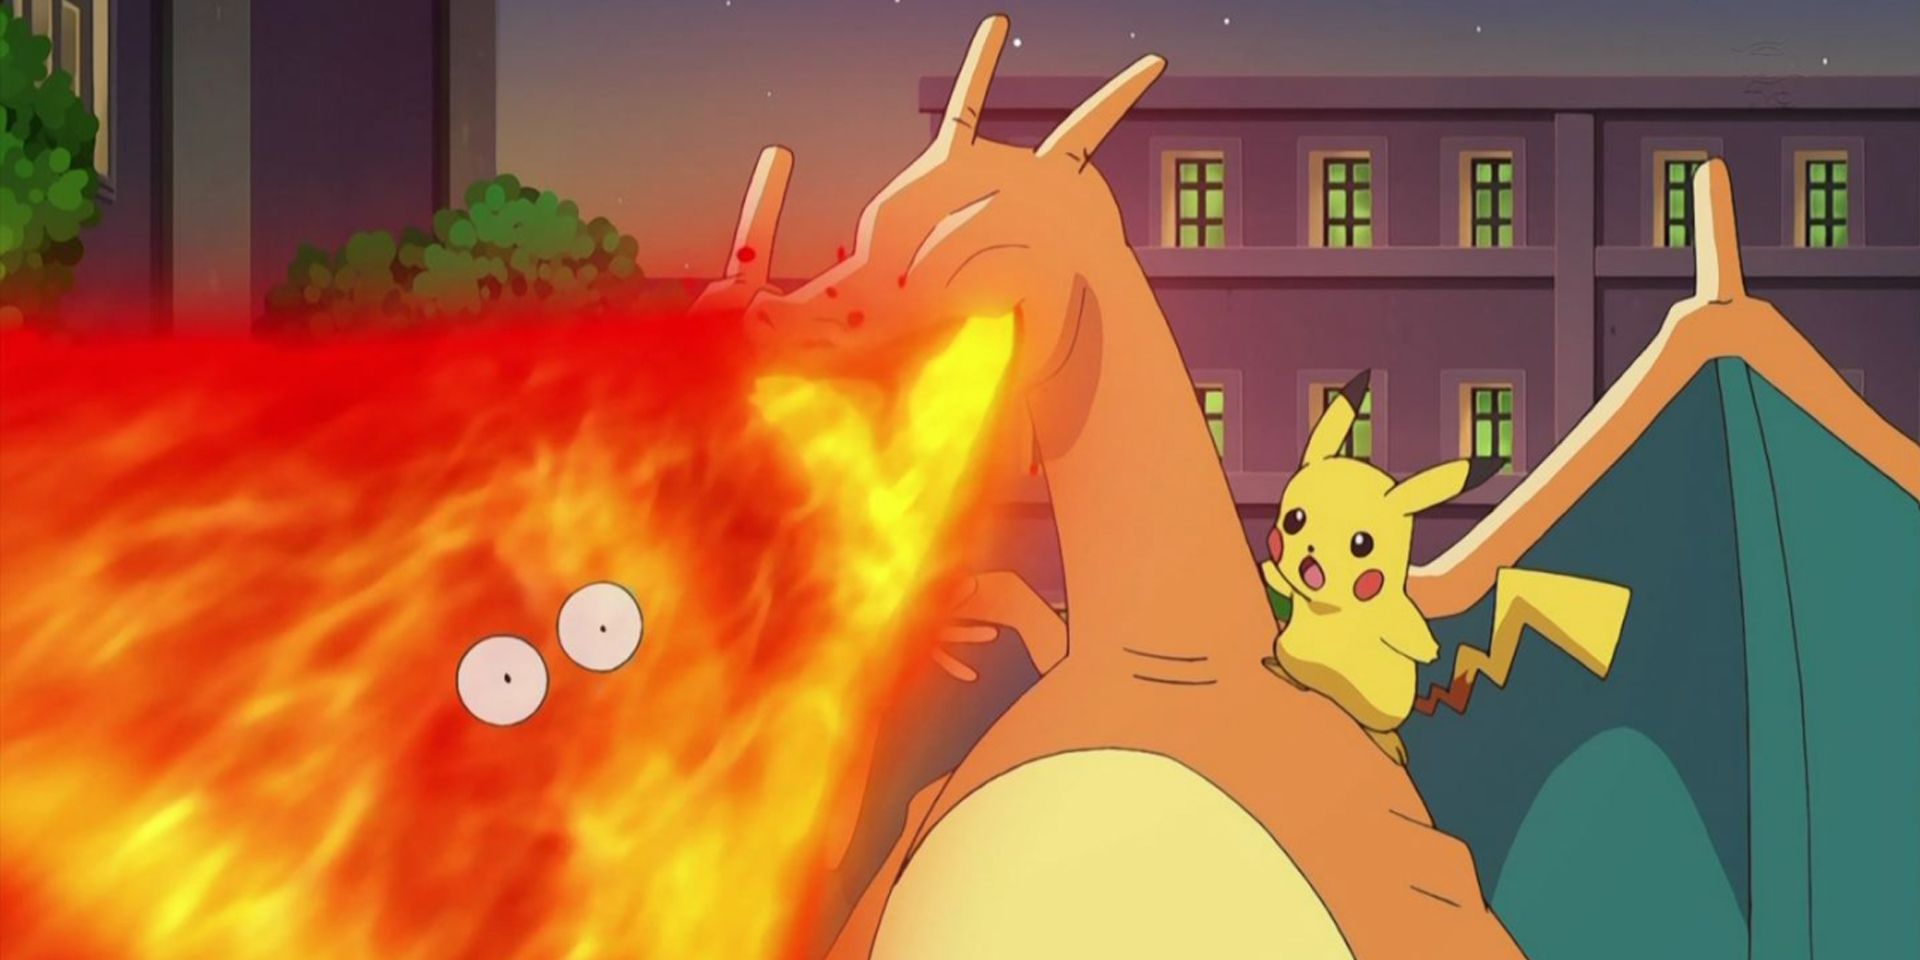 Pikachu on Charizard as it uses Flamethrower on Ash in the Pokemon anime